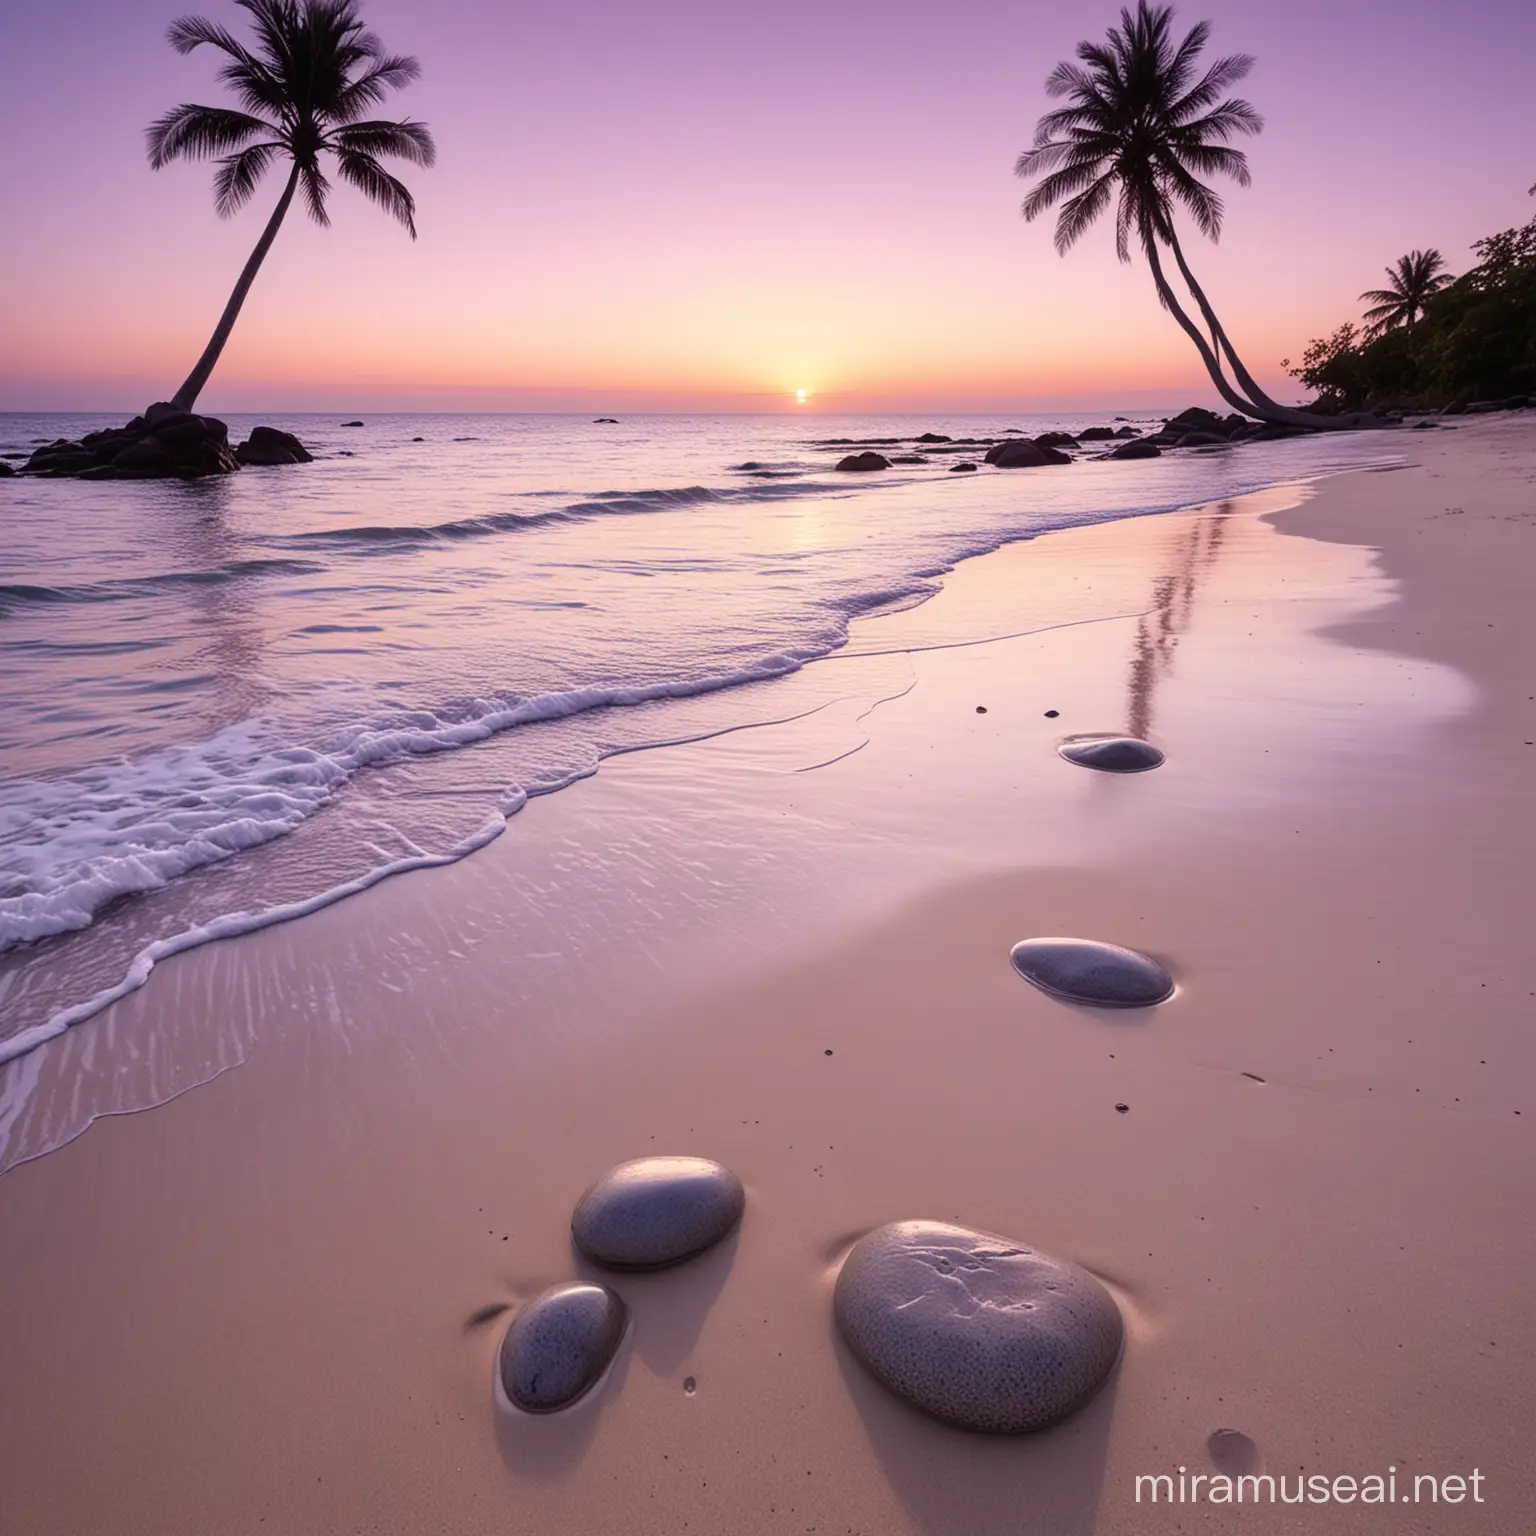 Tranquil Beach Sunset with Three Palm Trees and Round Grey Stones